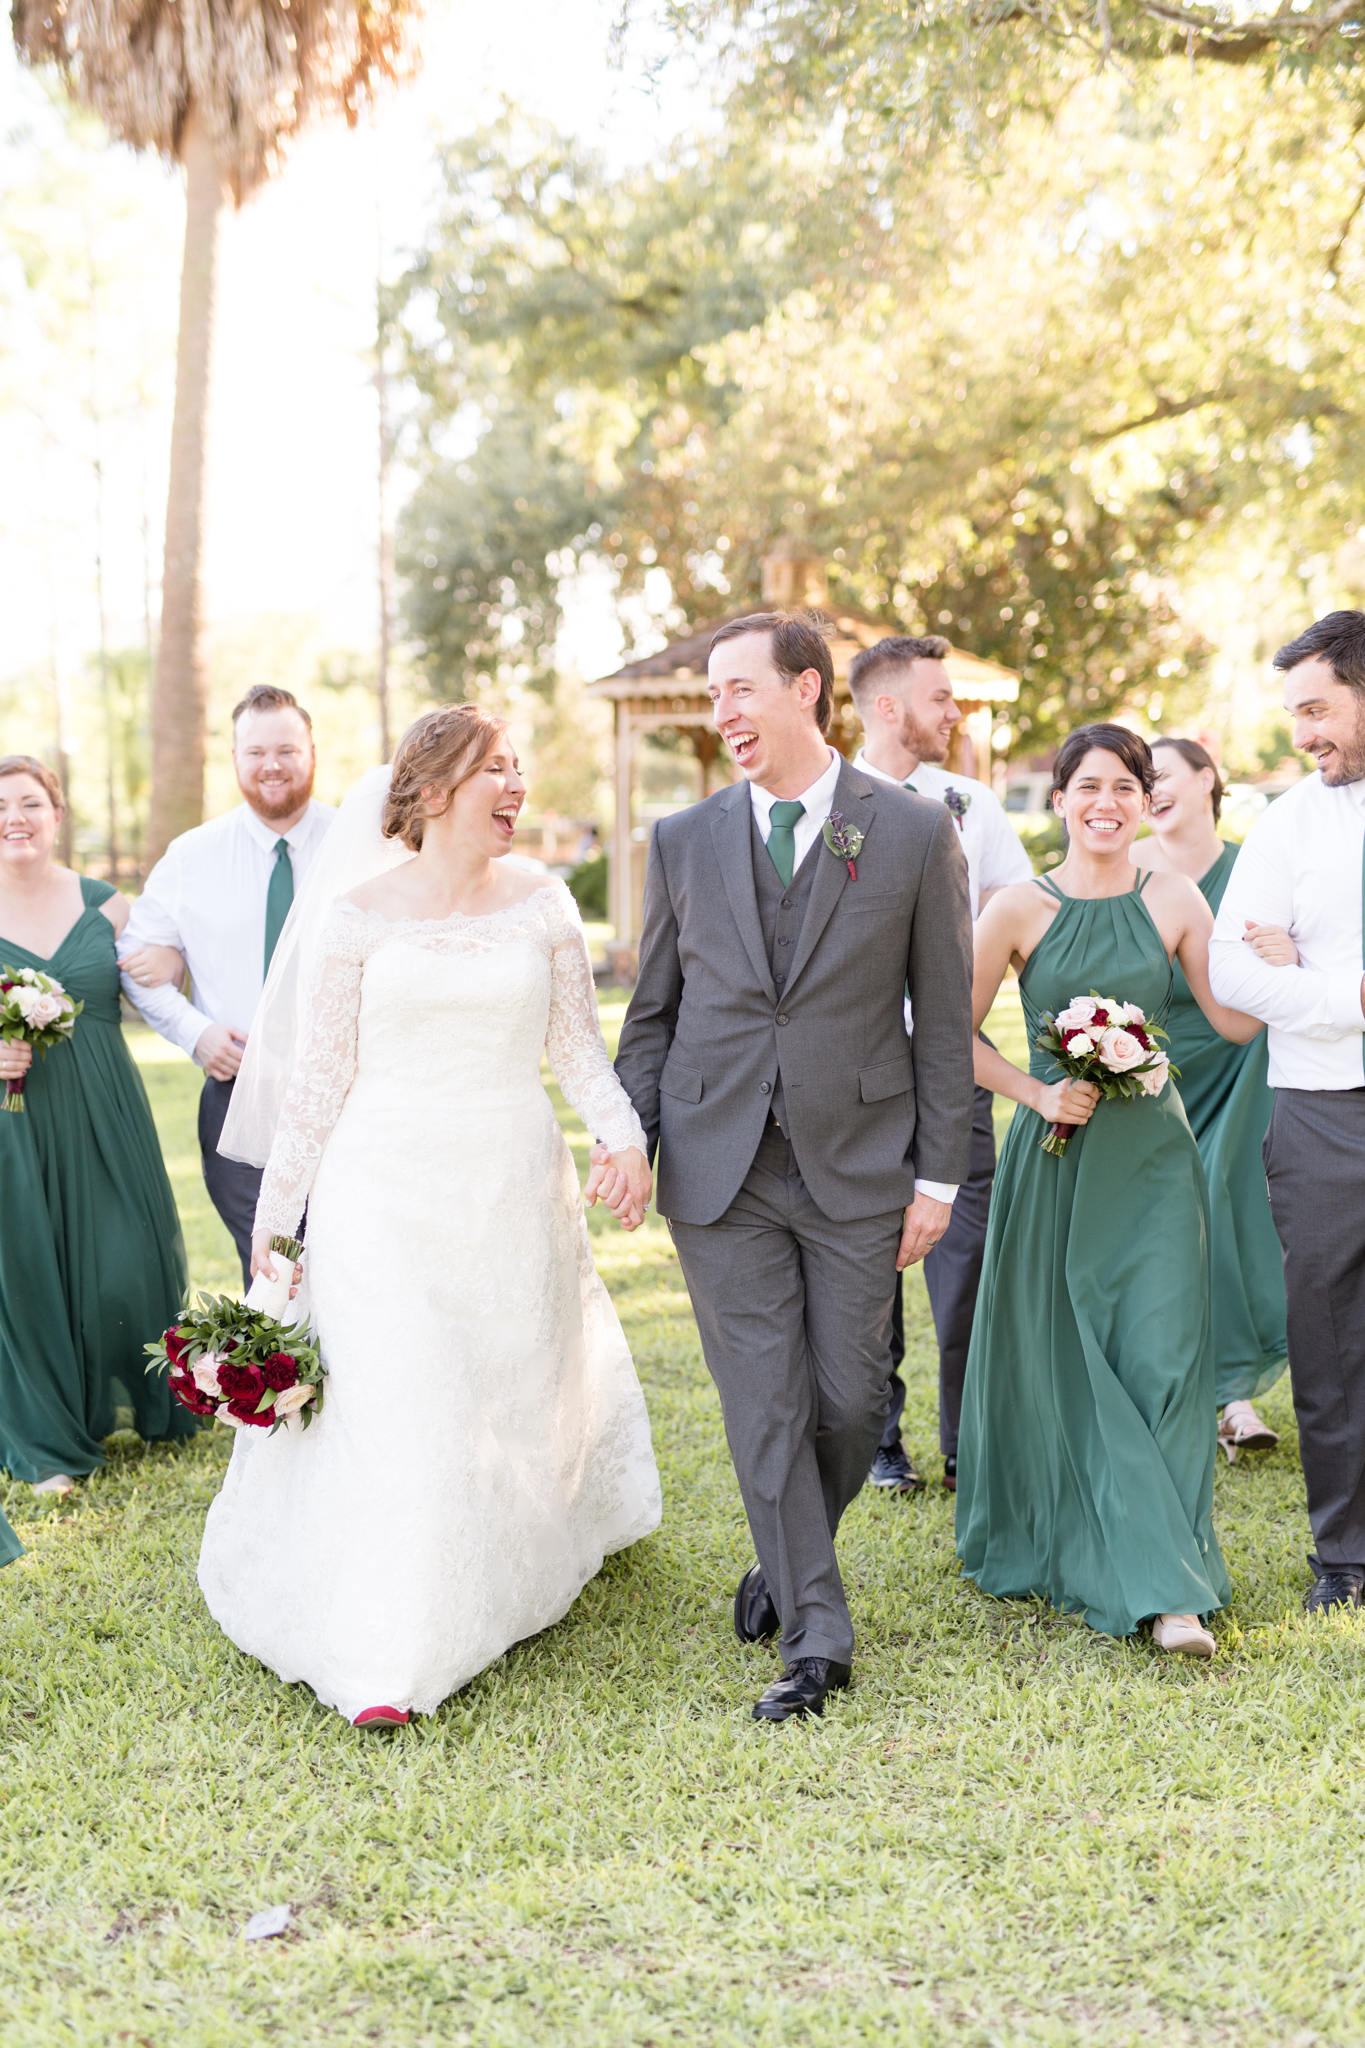 Bride and groom walk and laugh with wedding party.